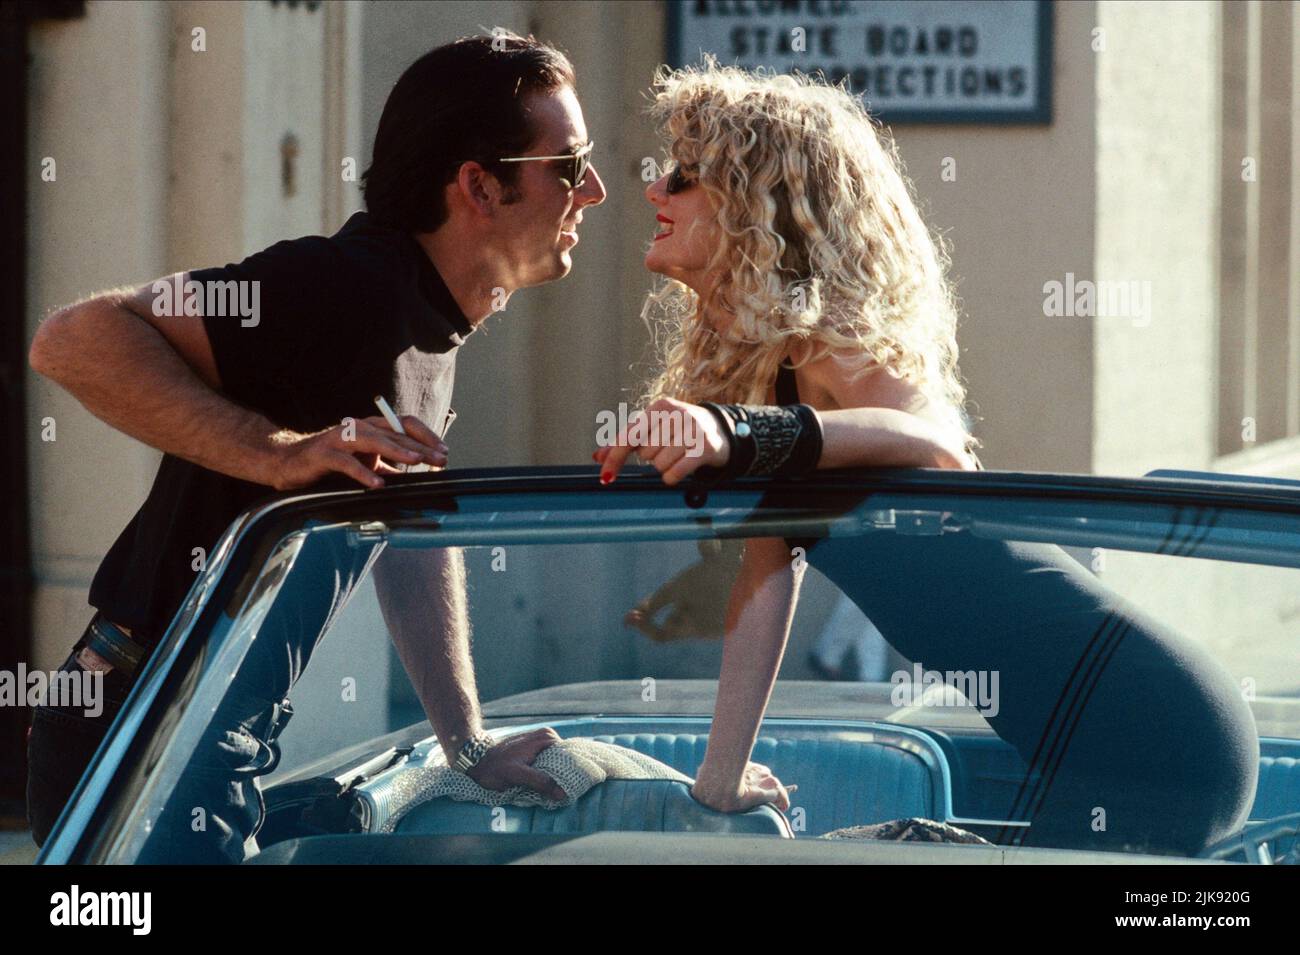 Nicolas Cage & Laura Dern Film: Wild At Heart (USA 1990) Characters: Sailor  Ripley, Lula Fortune / 1965 Ford Thunderbird / Literaturverfilmung (Based  On The Book By Barry Gifford) Director: David Lynch